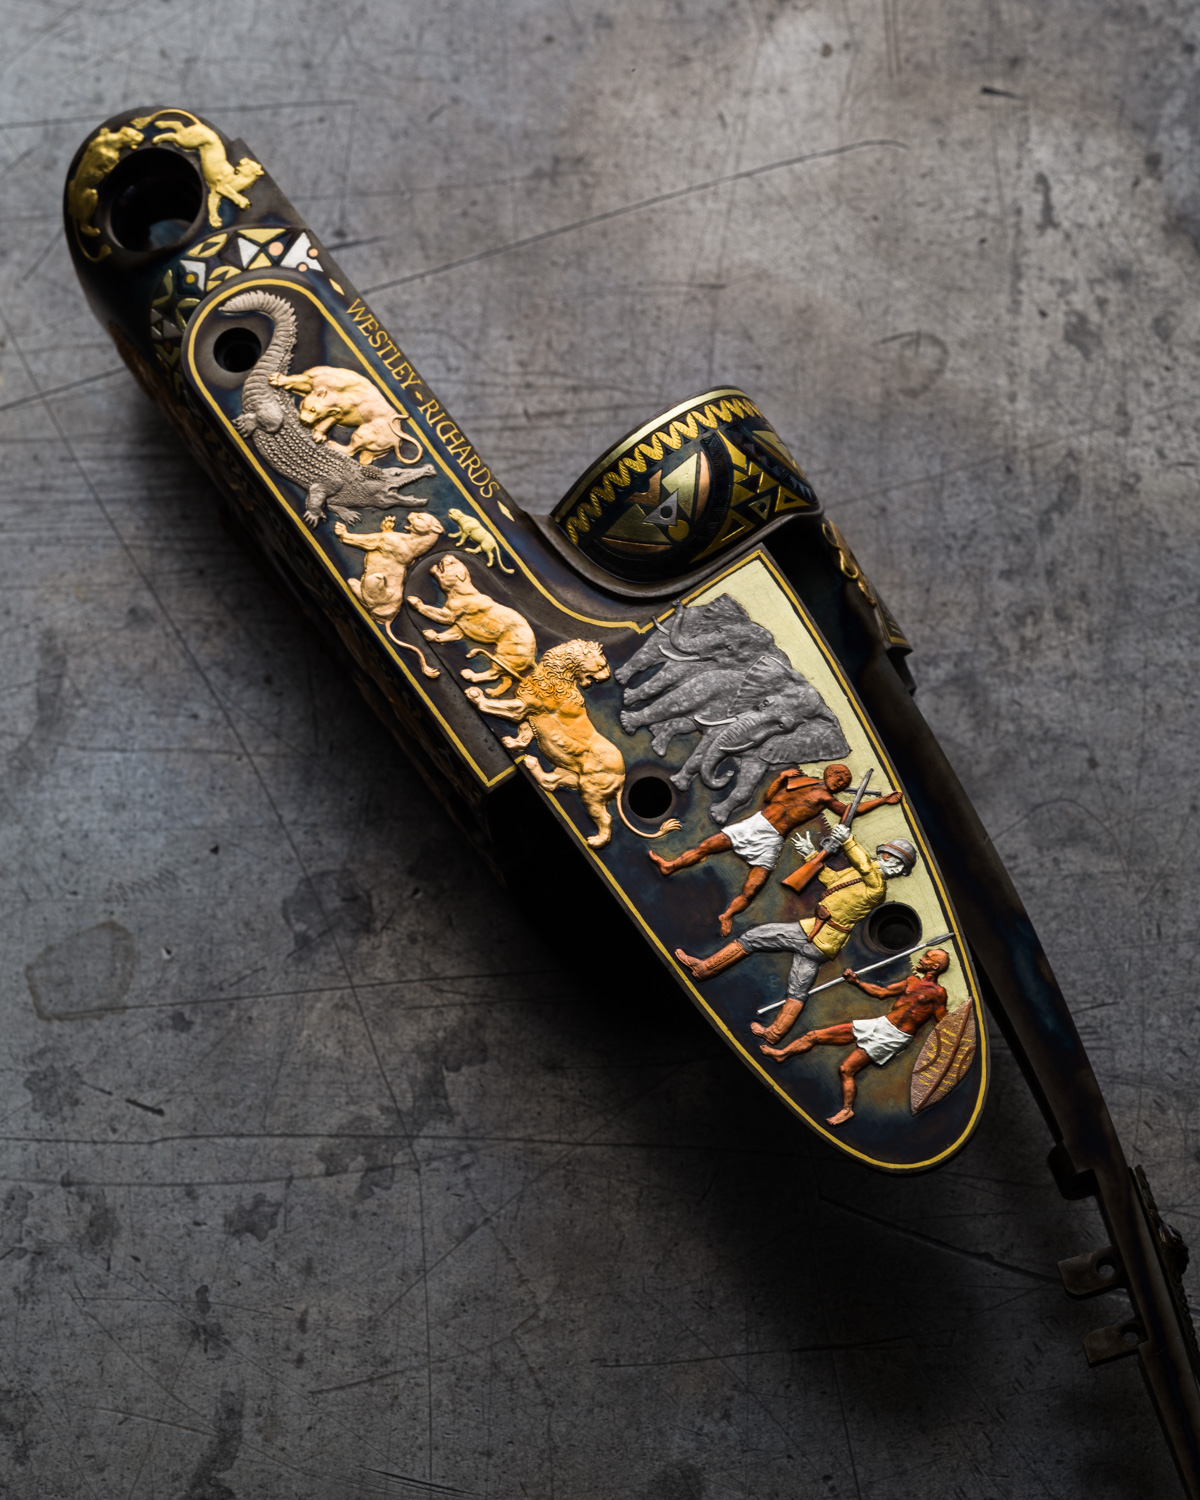 The Westley Richards Africa Rifle